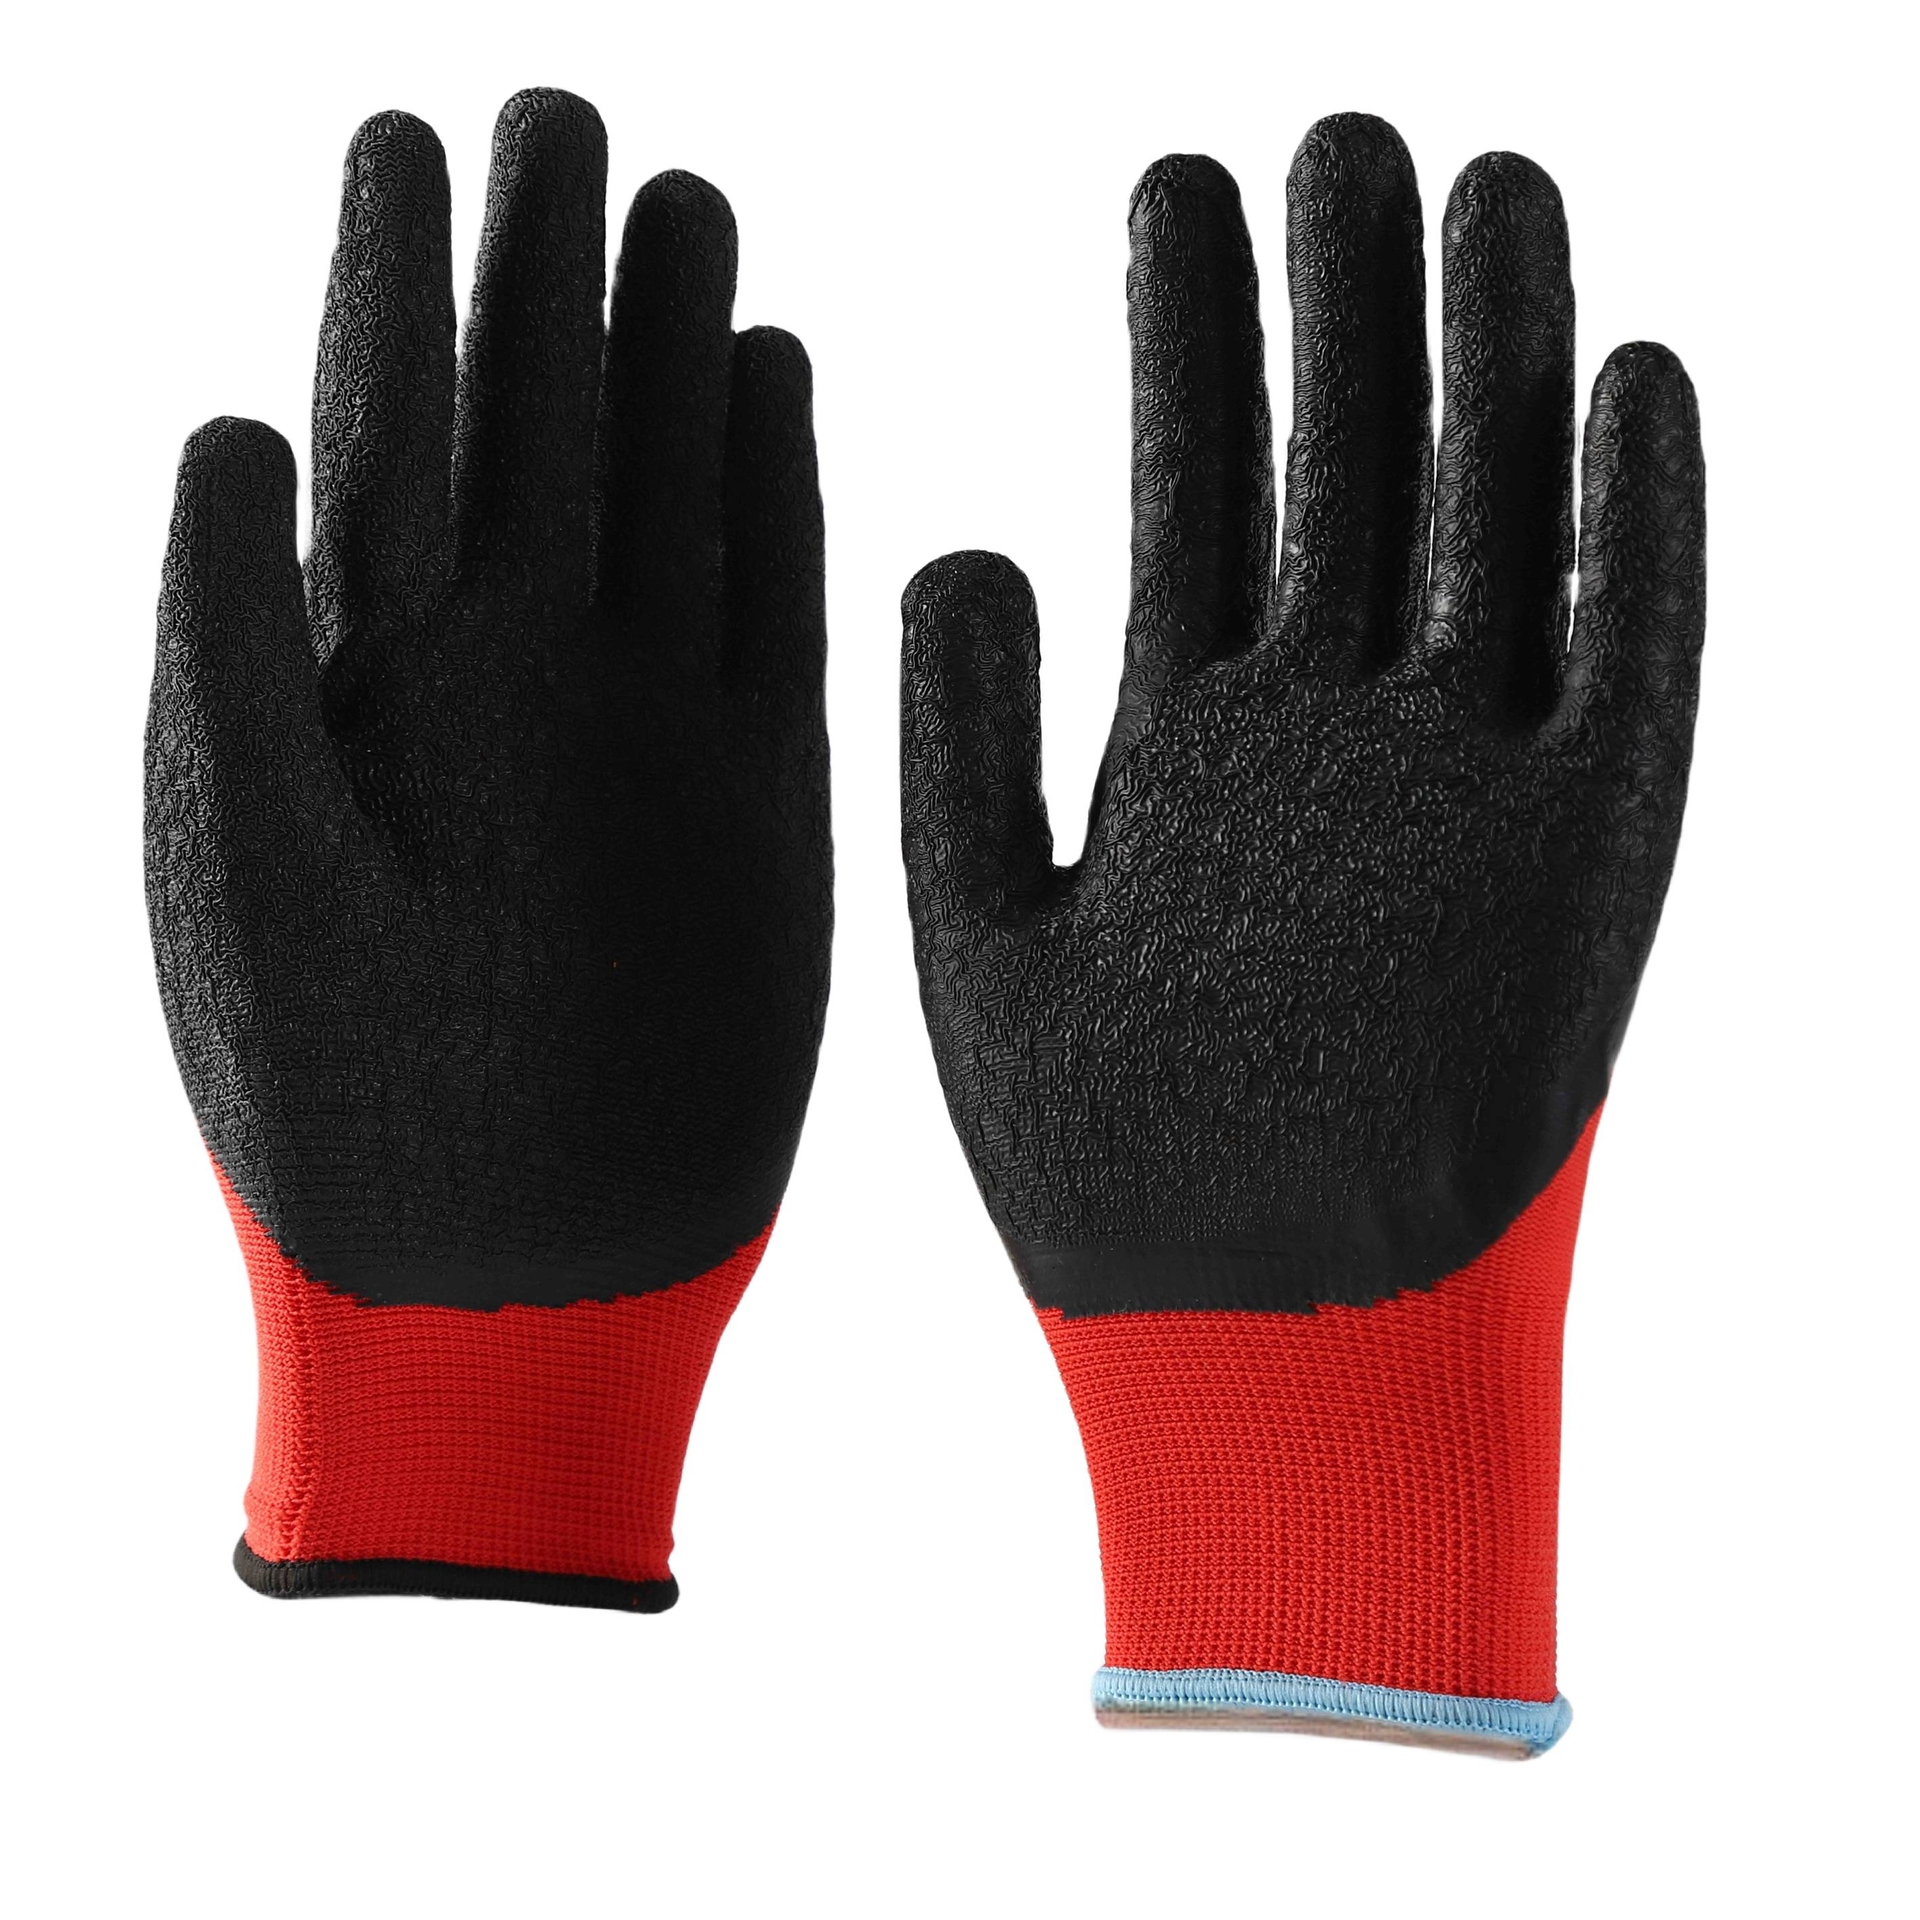                 Red polyester with black crinkle latex half coated gloves            